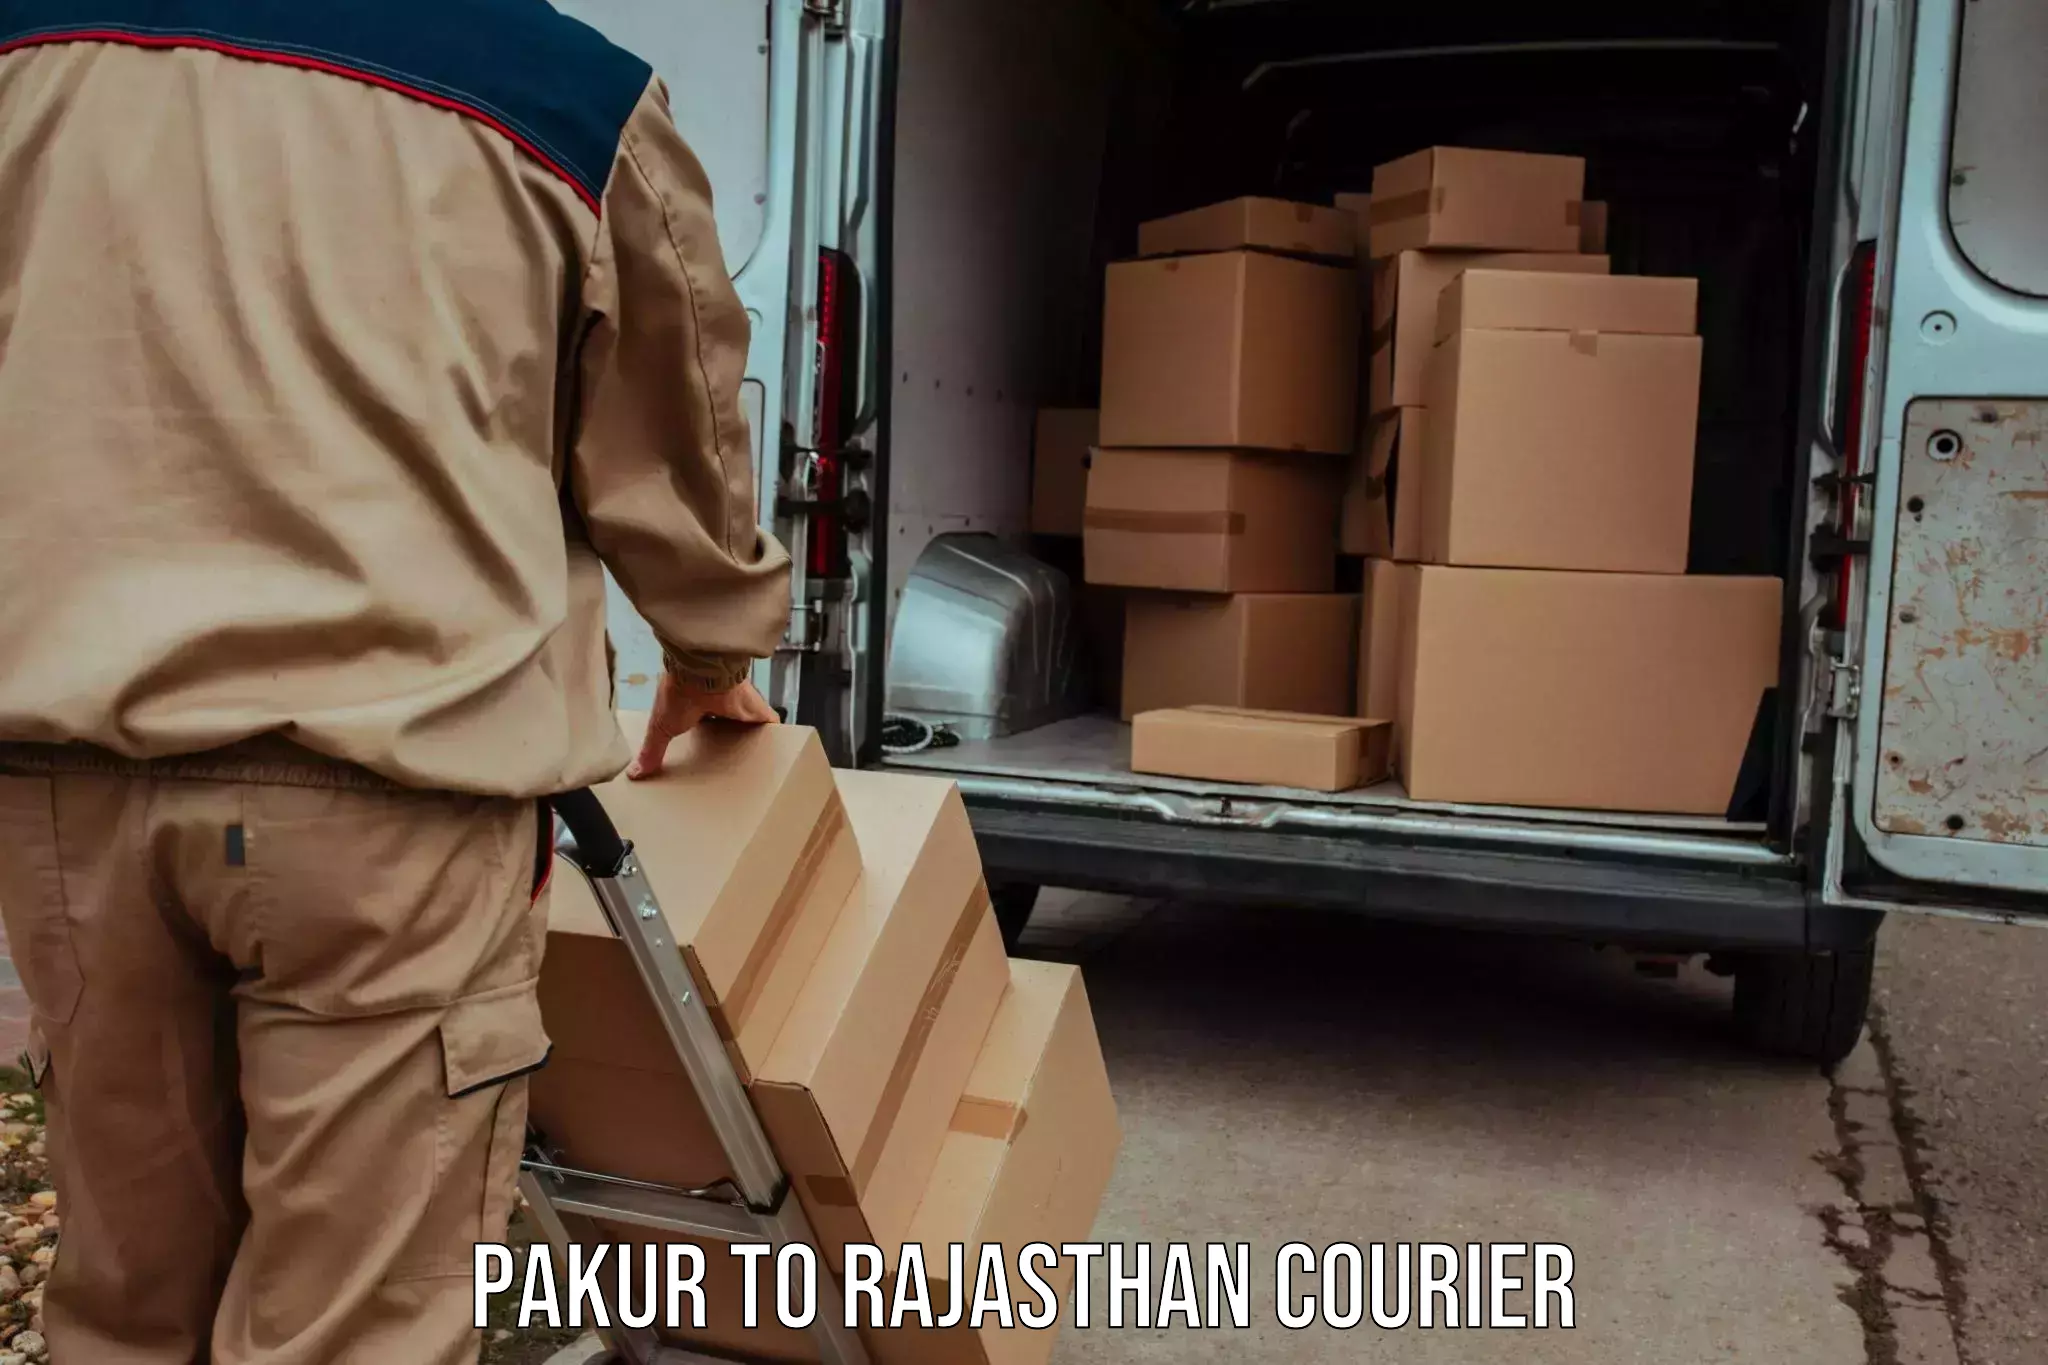 Customer-oriented courier services Pakur to Jaipur